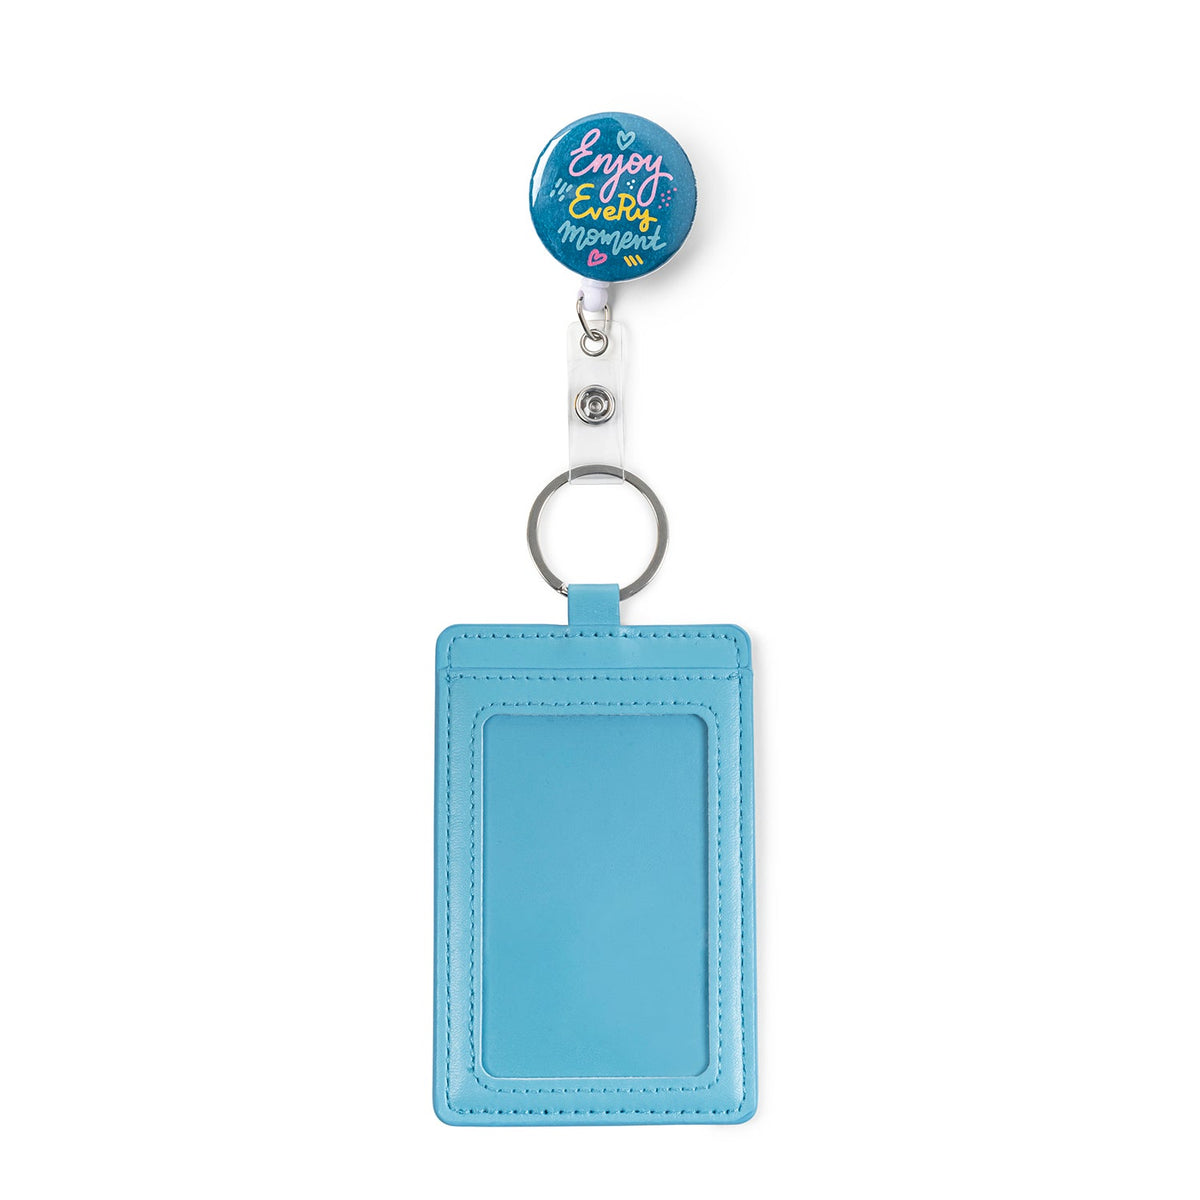 Every Moment Button Badge Reel with Pocket